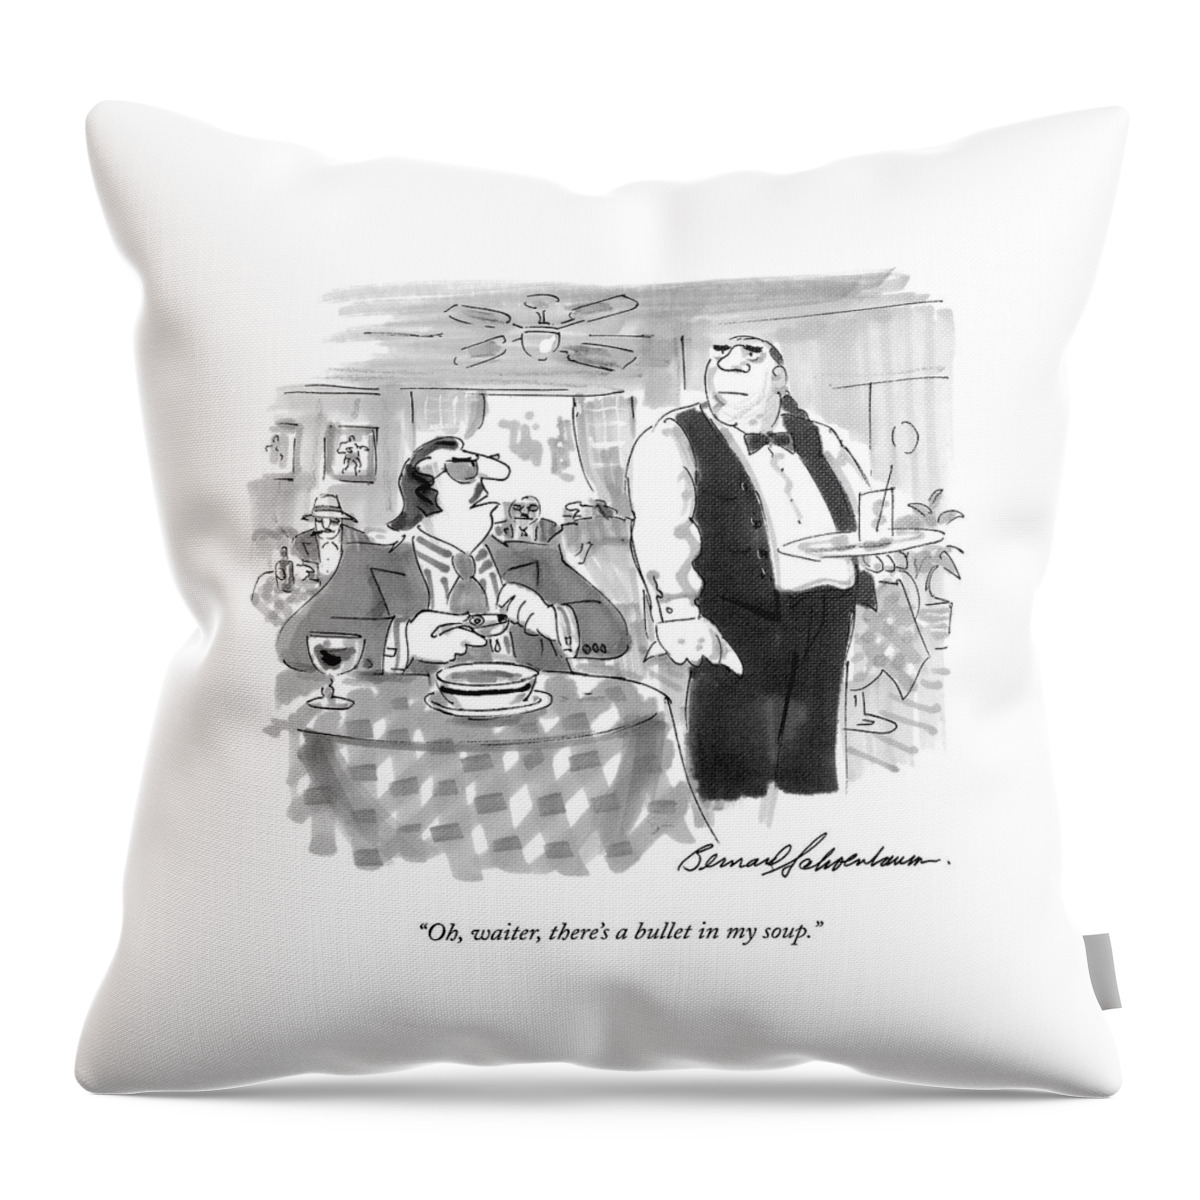 Oh, Waiter, There's A Bullet In My Soup Throw Pillow